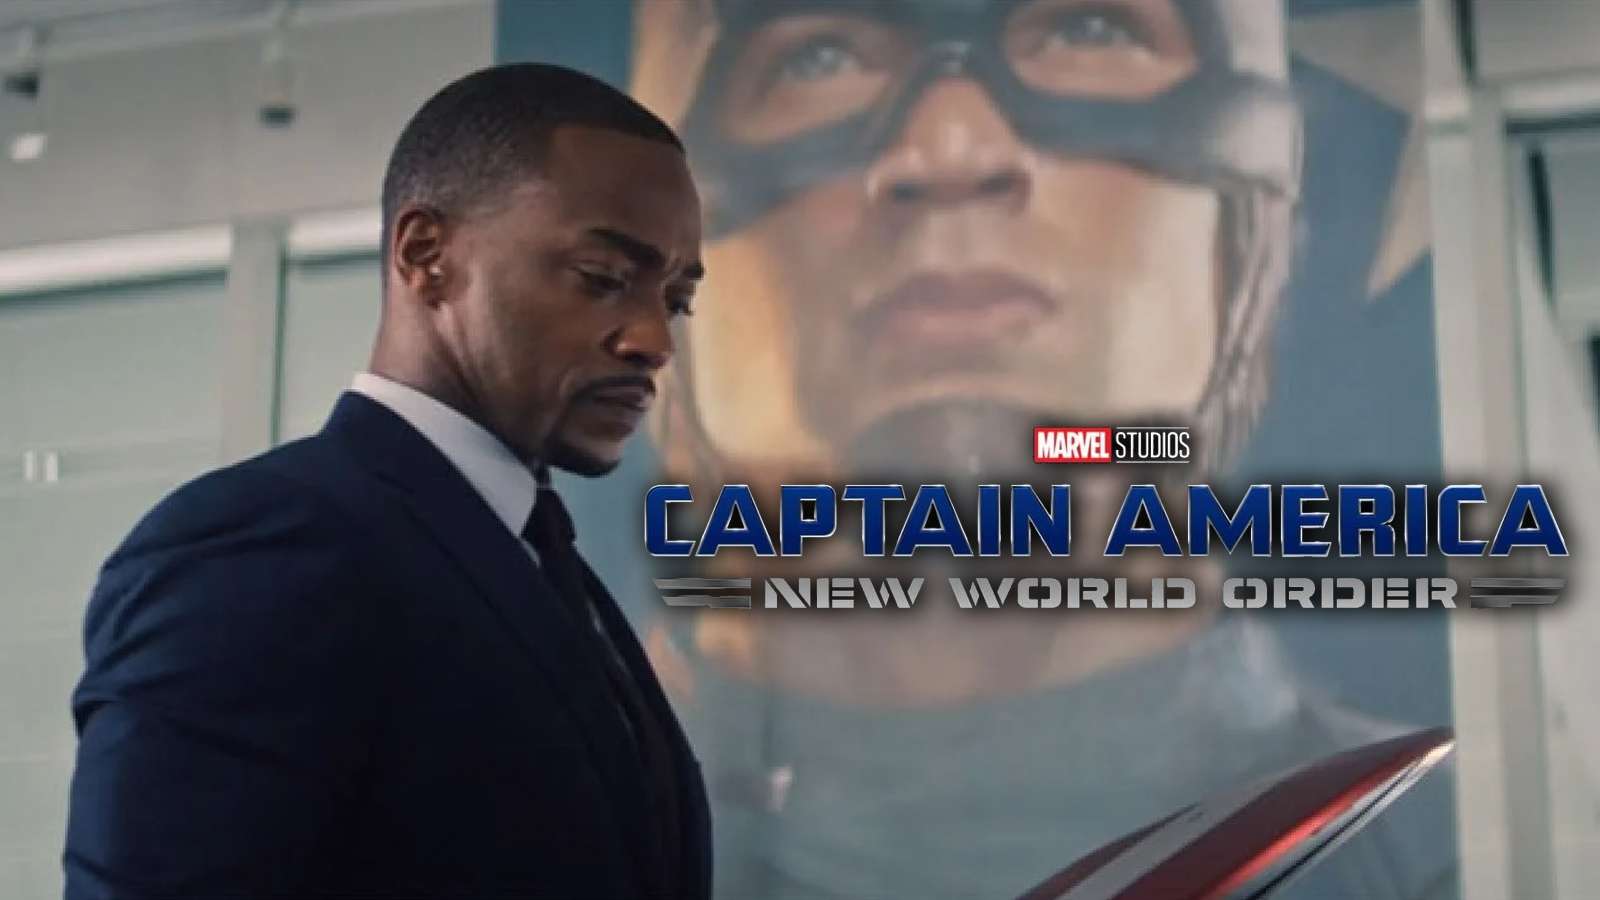 An image of Anthony Mackie as Captain America in The Falcon and The Winter Soldier